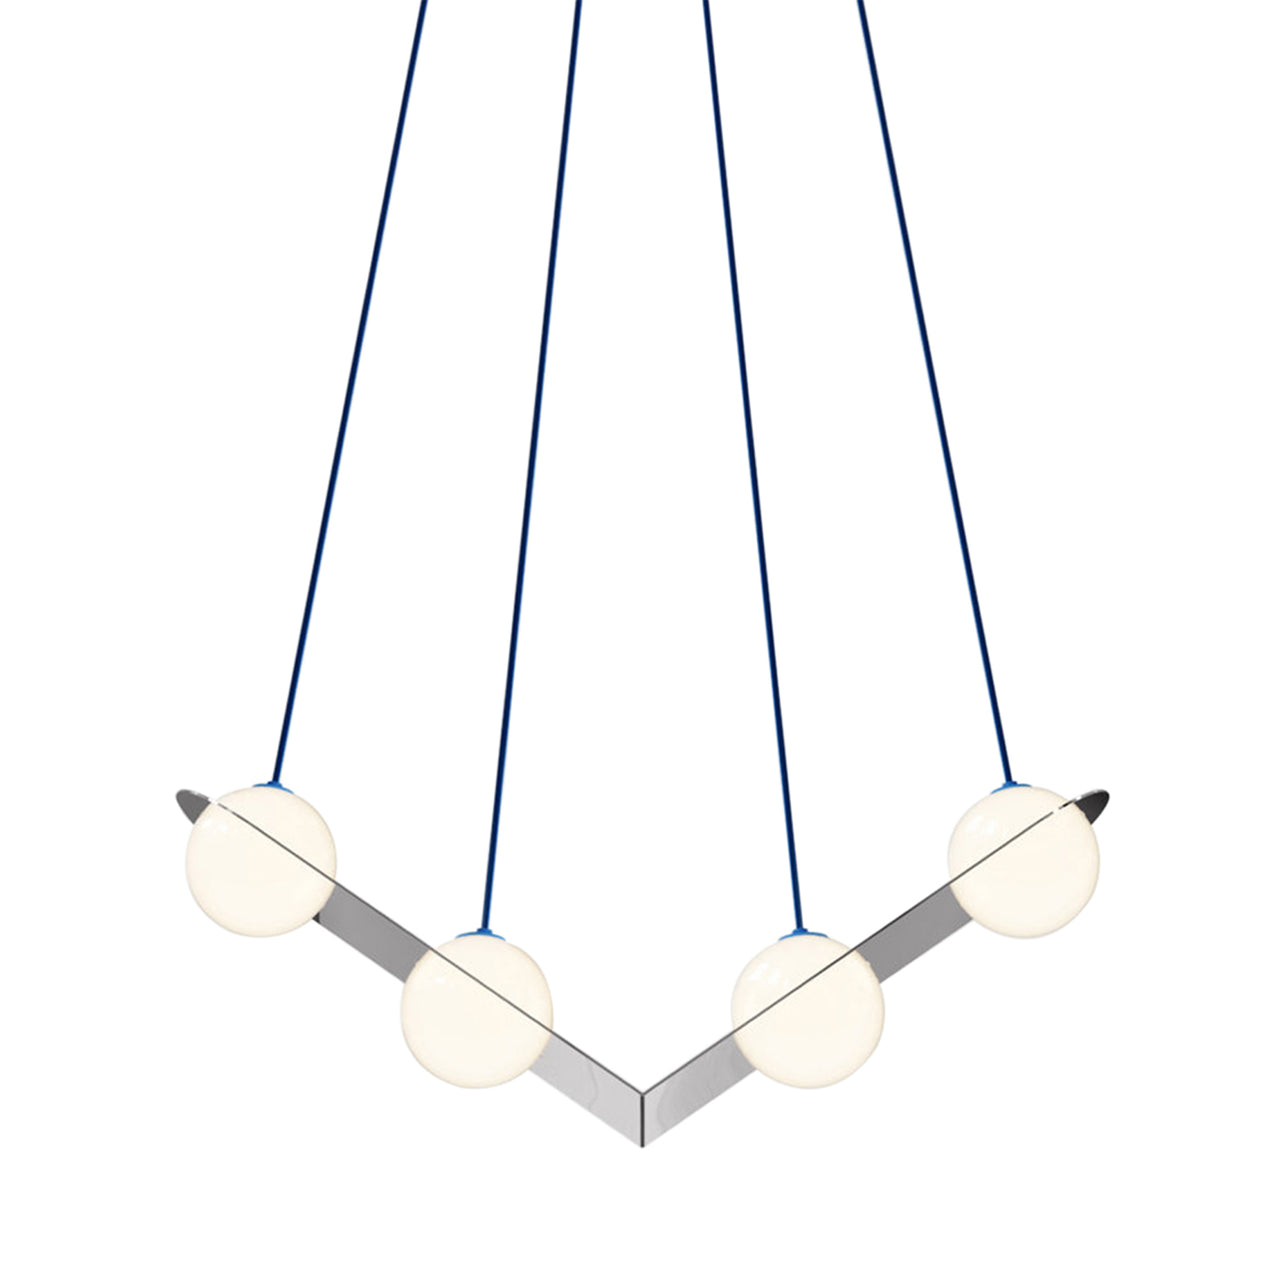 Laurent 02 Suspension Lamp: Nickel Plated + Blue + Angled Wires